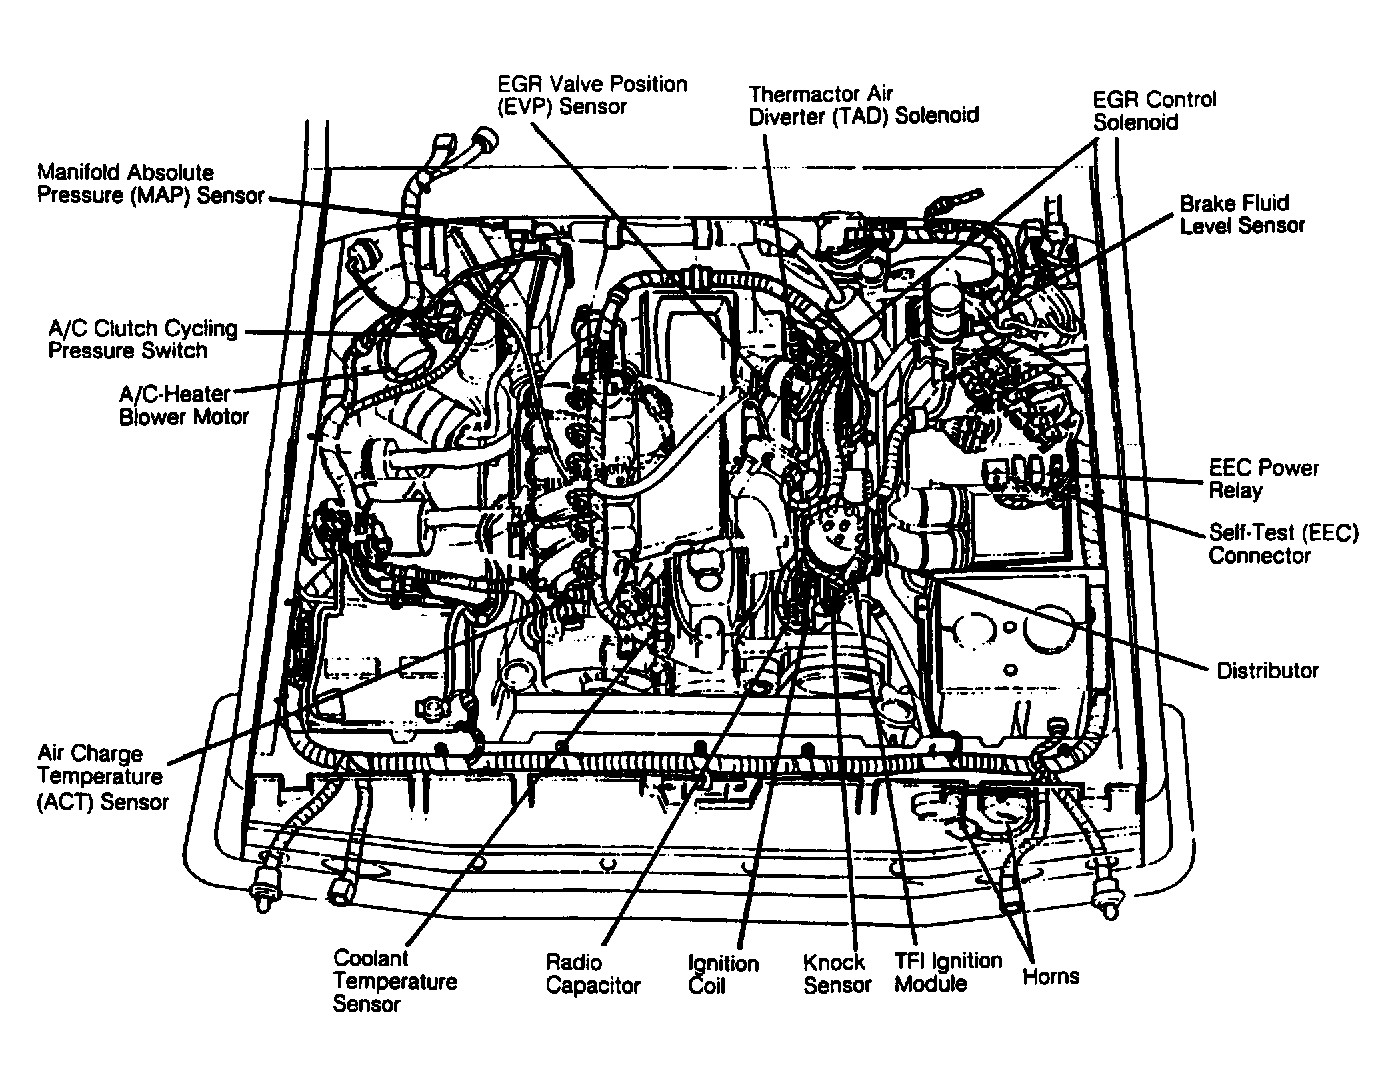 91 F150 4.9l Engine Drawings My Bronco Wount Start Ok I Got A 91 ford Bronco 5 8l V8 Page 2 Of 91 F150 4.9l Engine Drawings